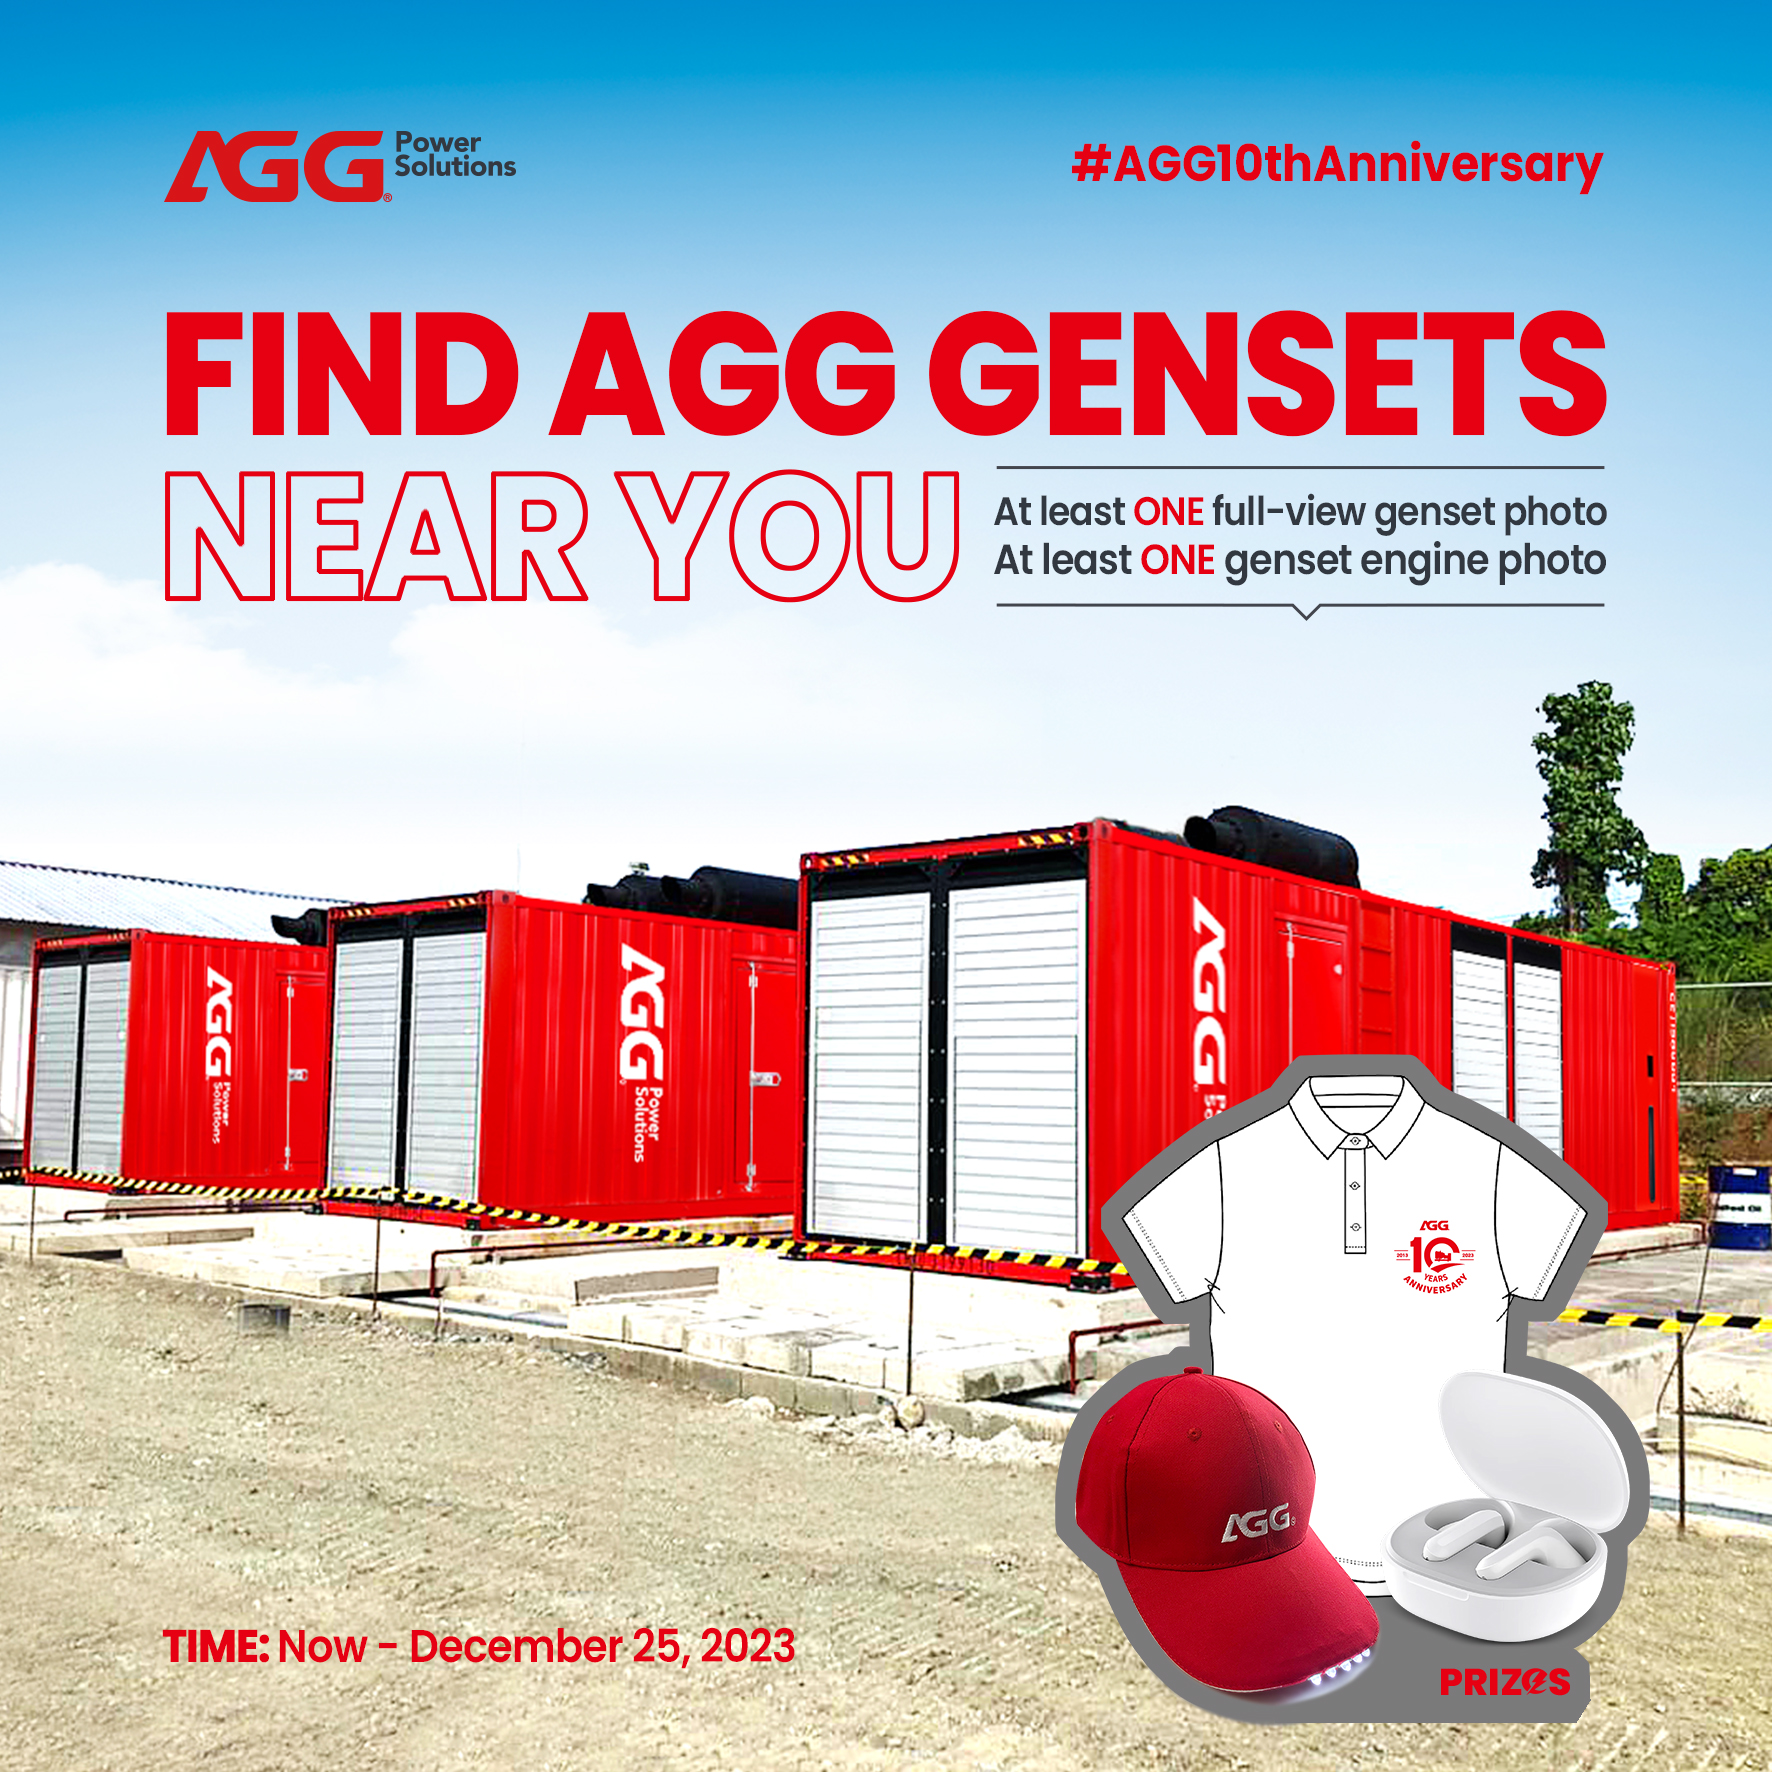 Take AGG Genset Photos and Win Prizes – Find AGG Gensets Near You!